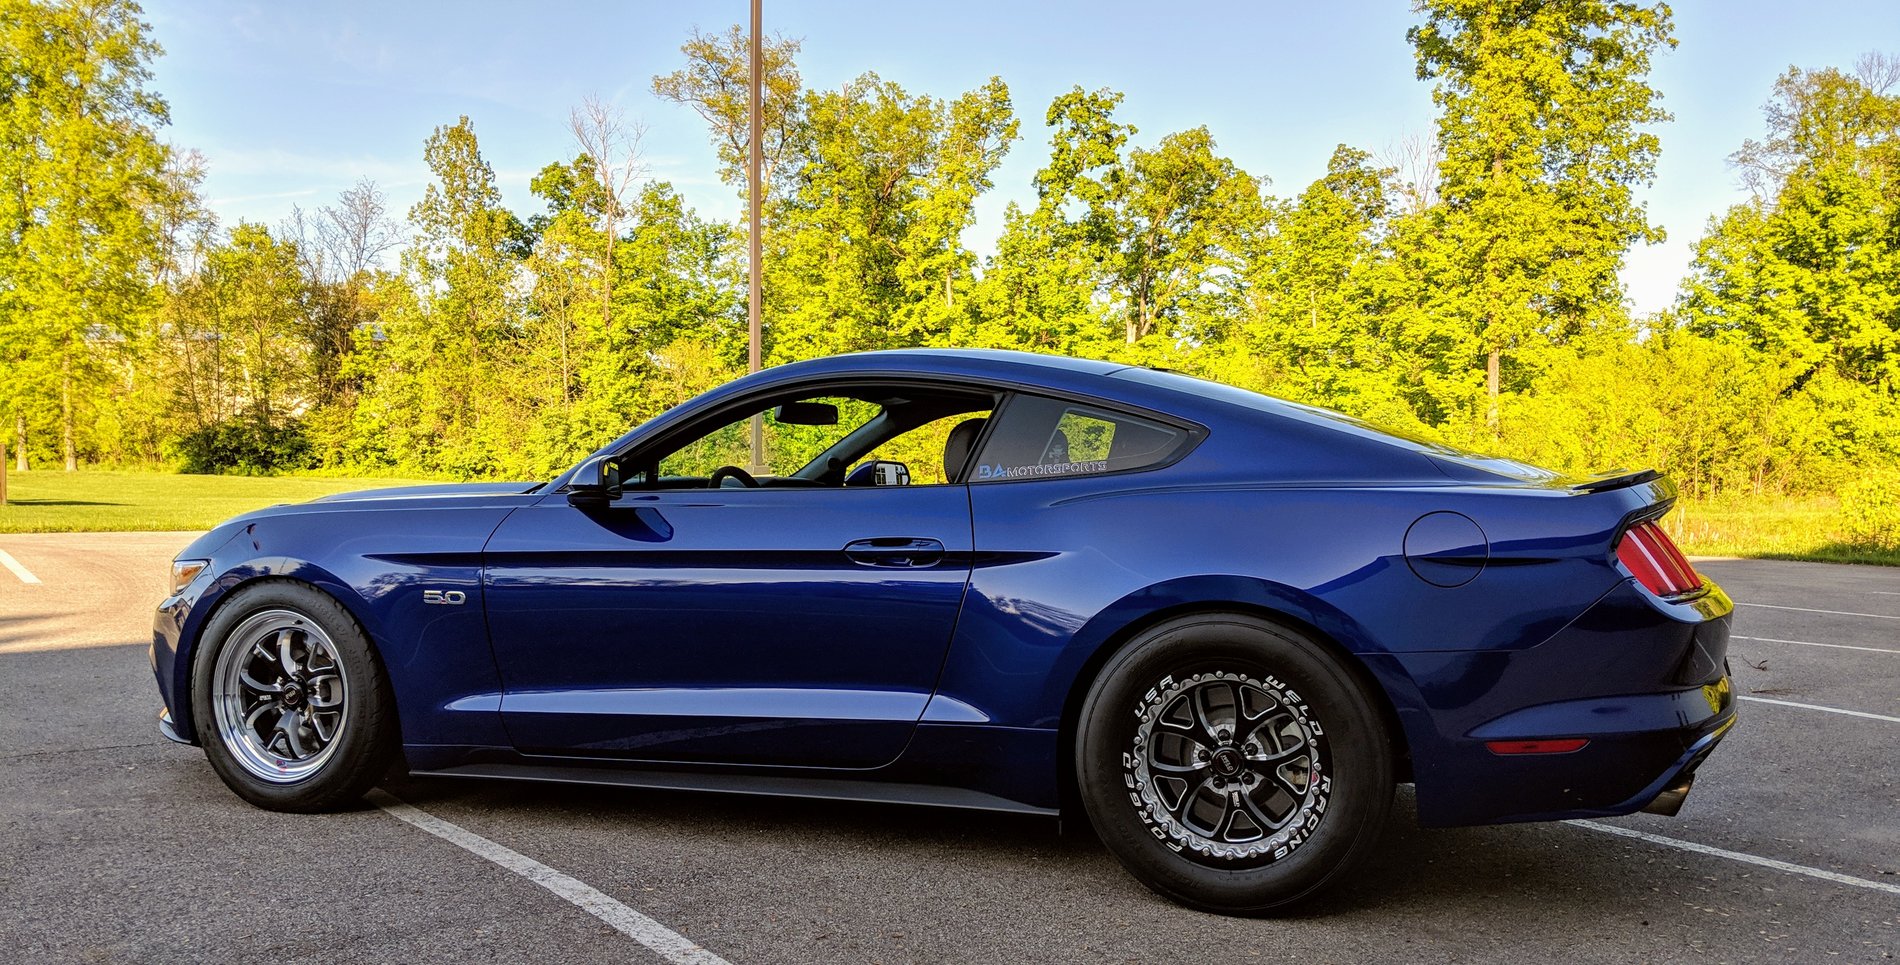 S650 Mustang Post Pictures of Your Car IMG_20190505_183819